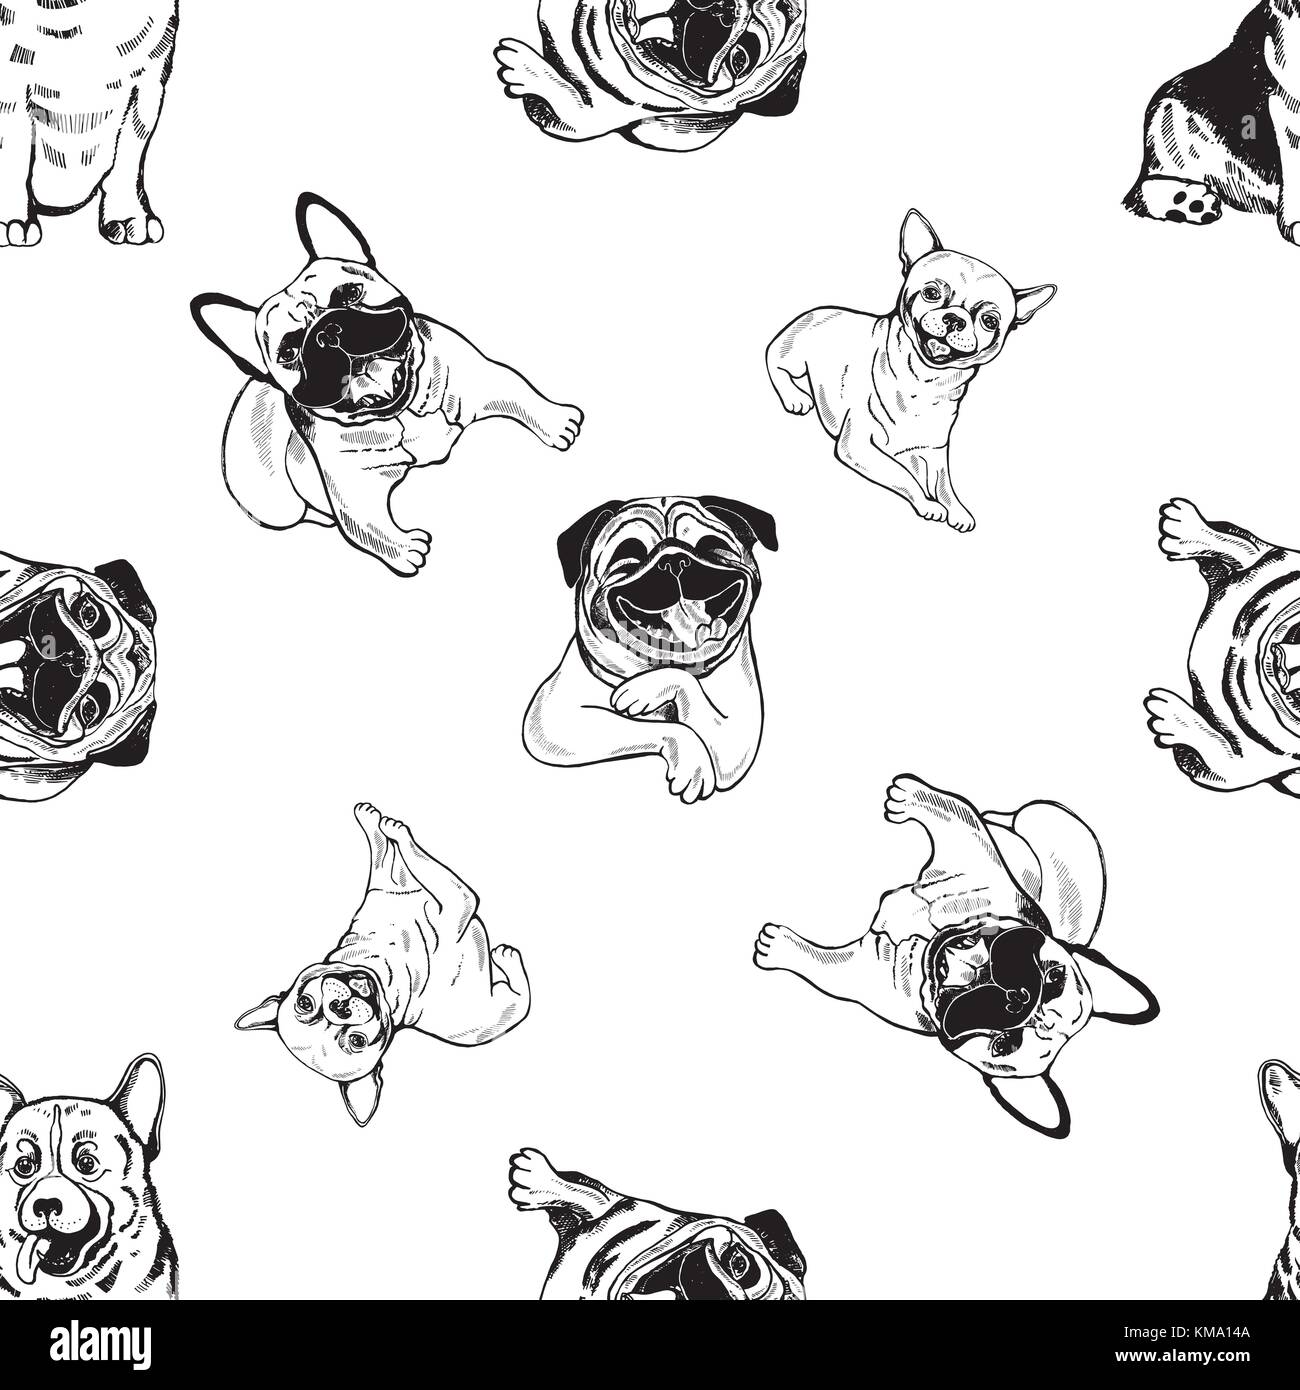 Seamless pattern of hand drawn sketch style dogs. Vector illustration isolated on white background. Stock Vector